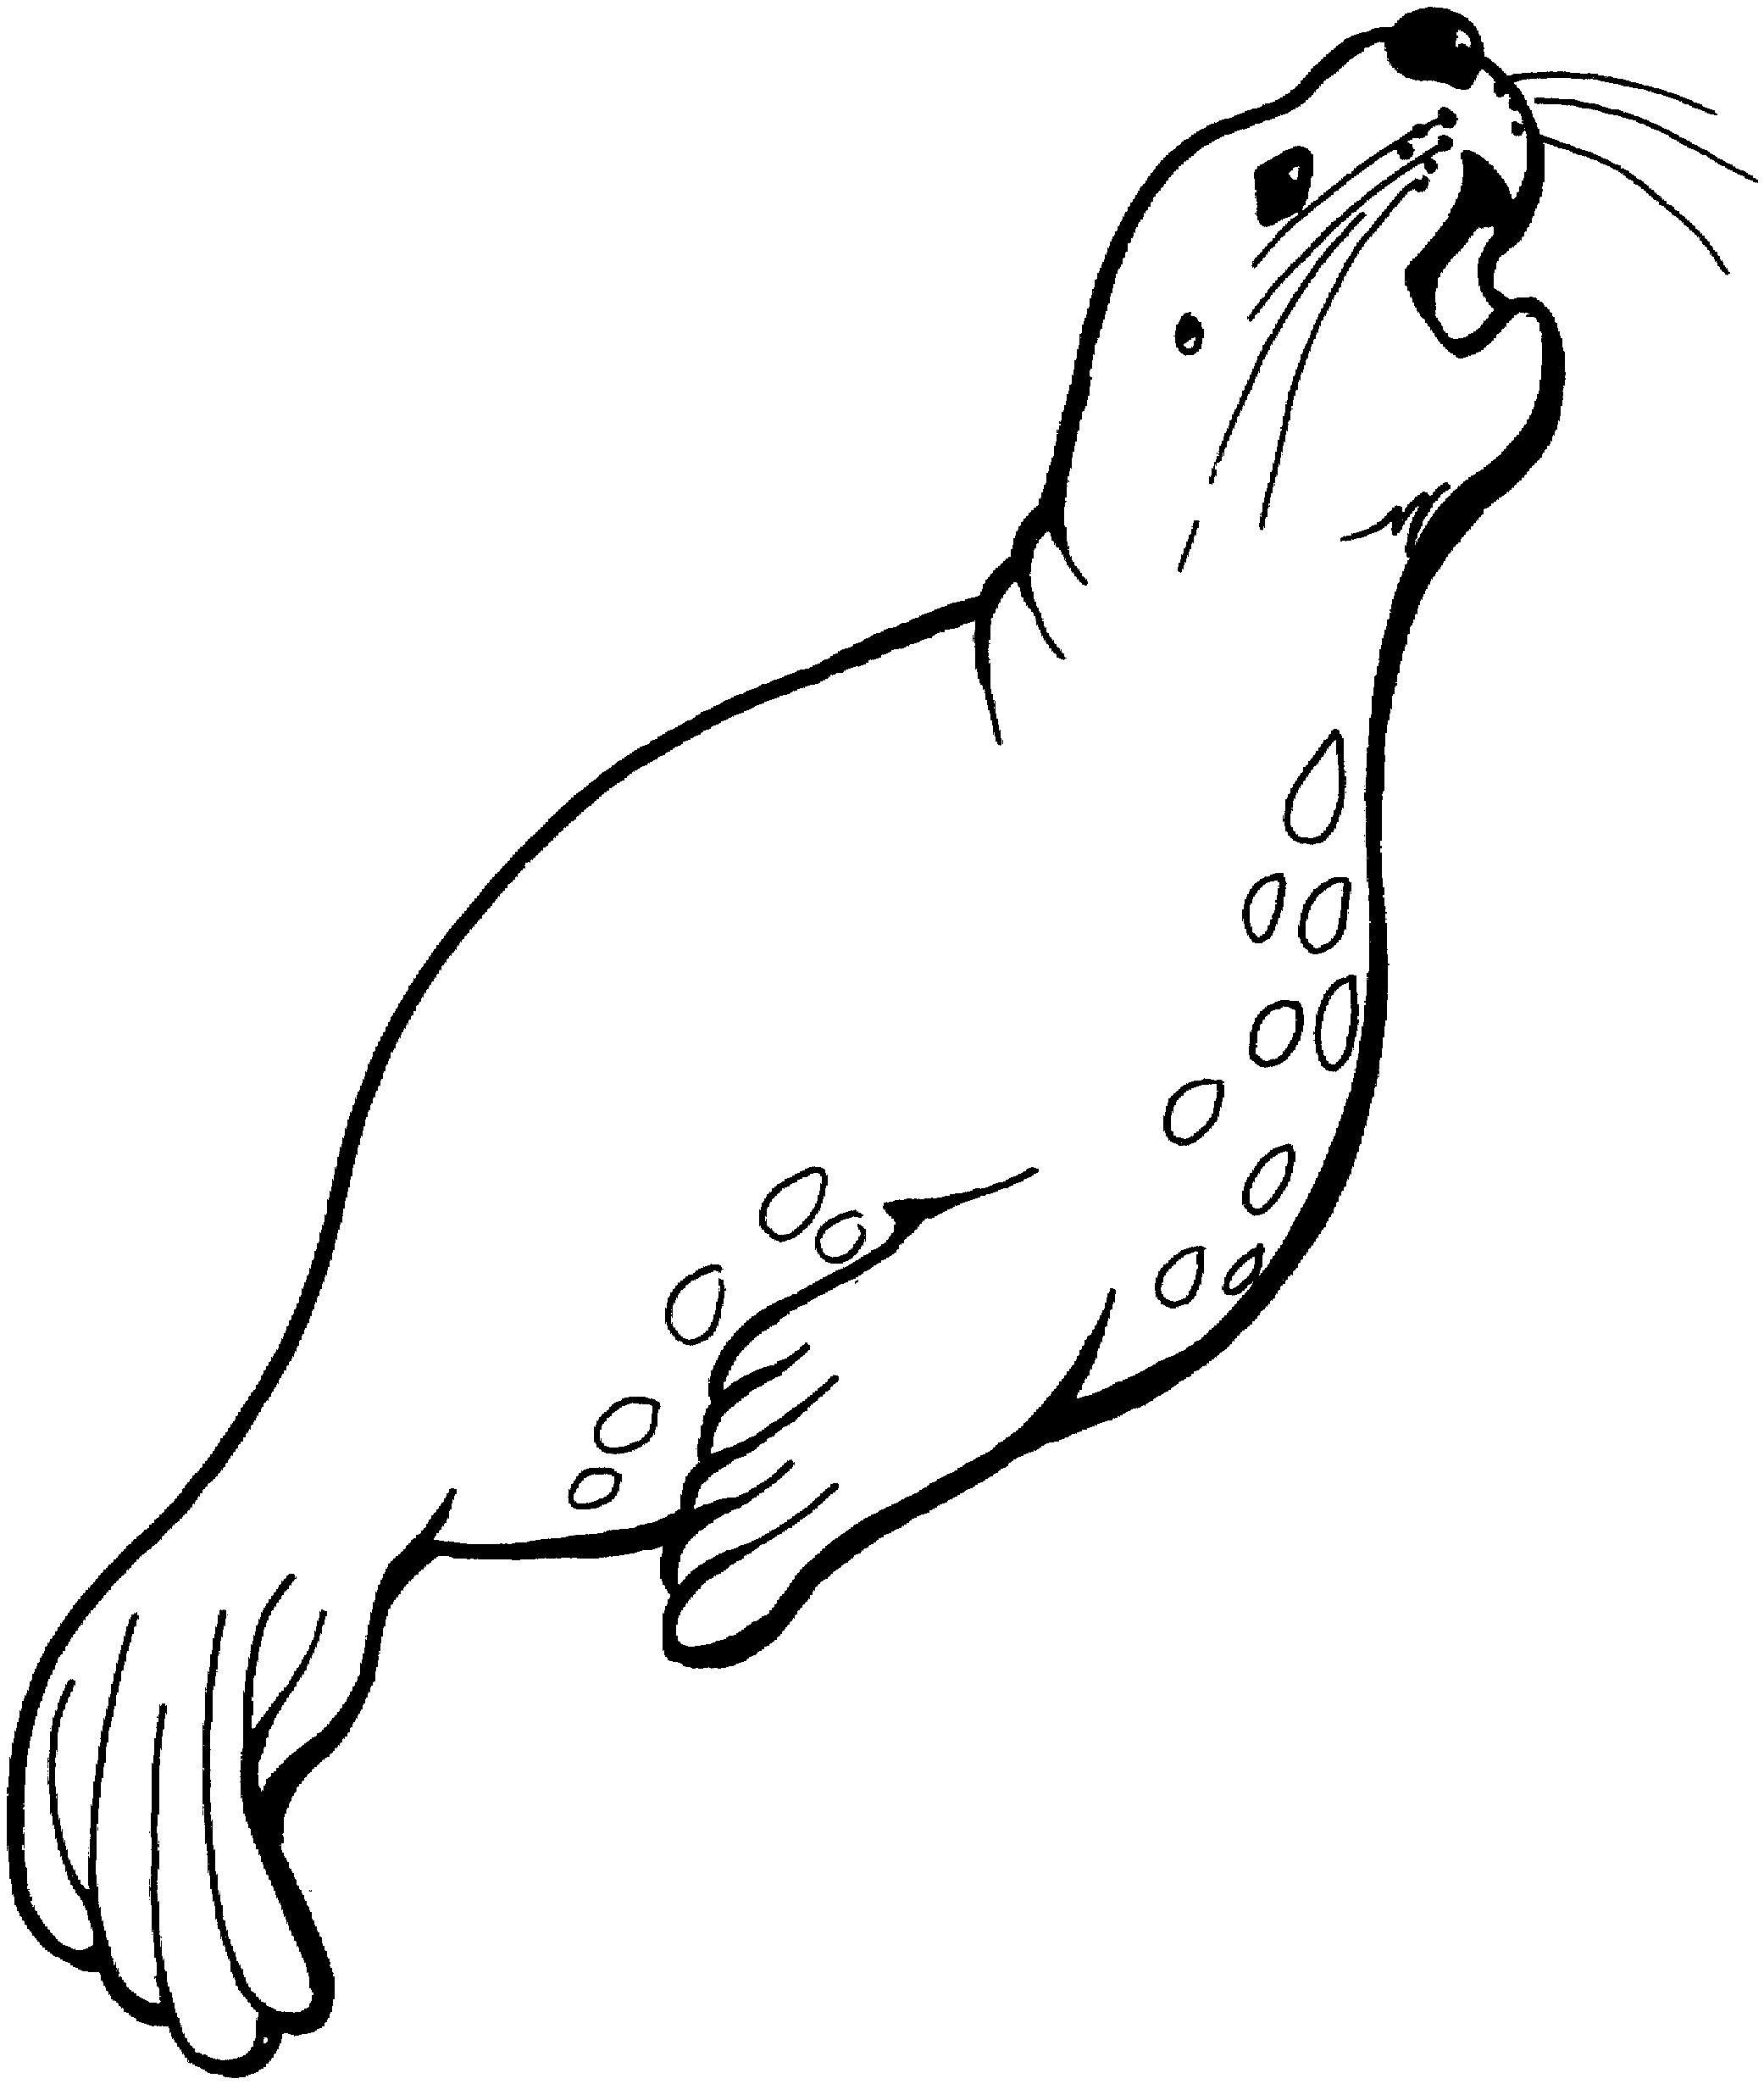 seal coloring page seal coloring pages download and print for free seal coloring page 